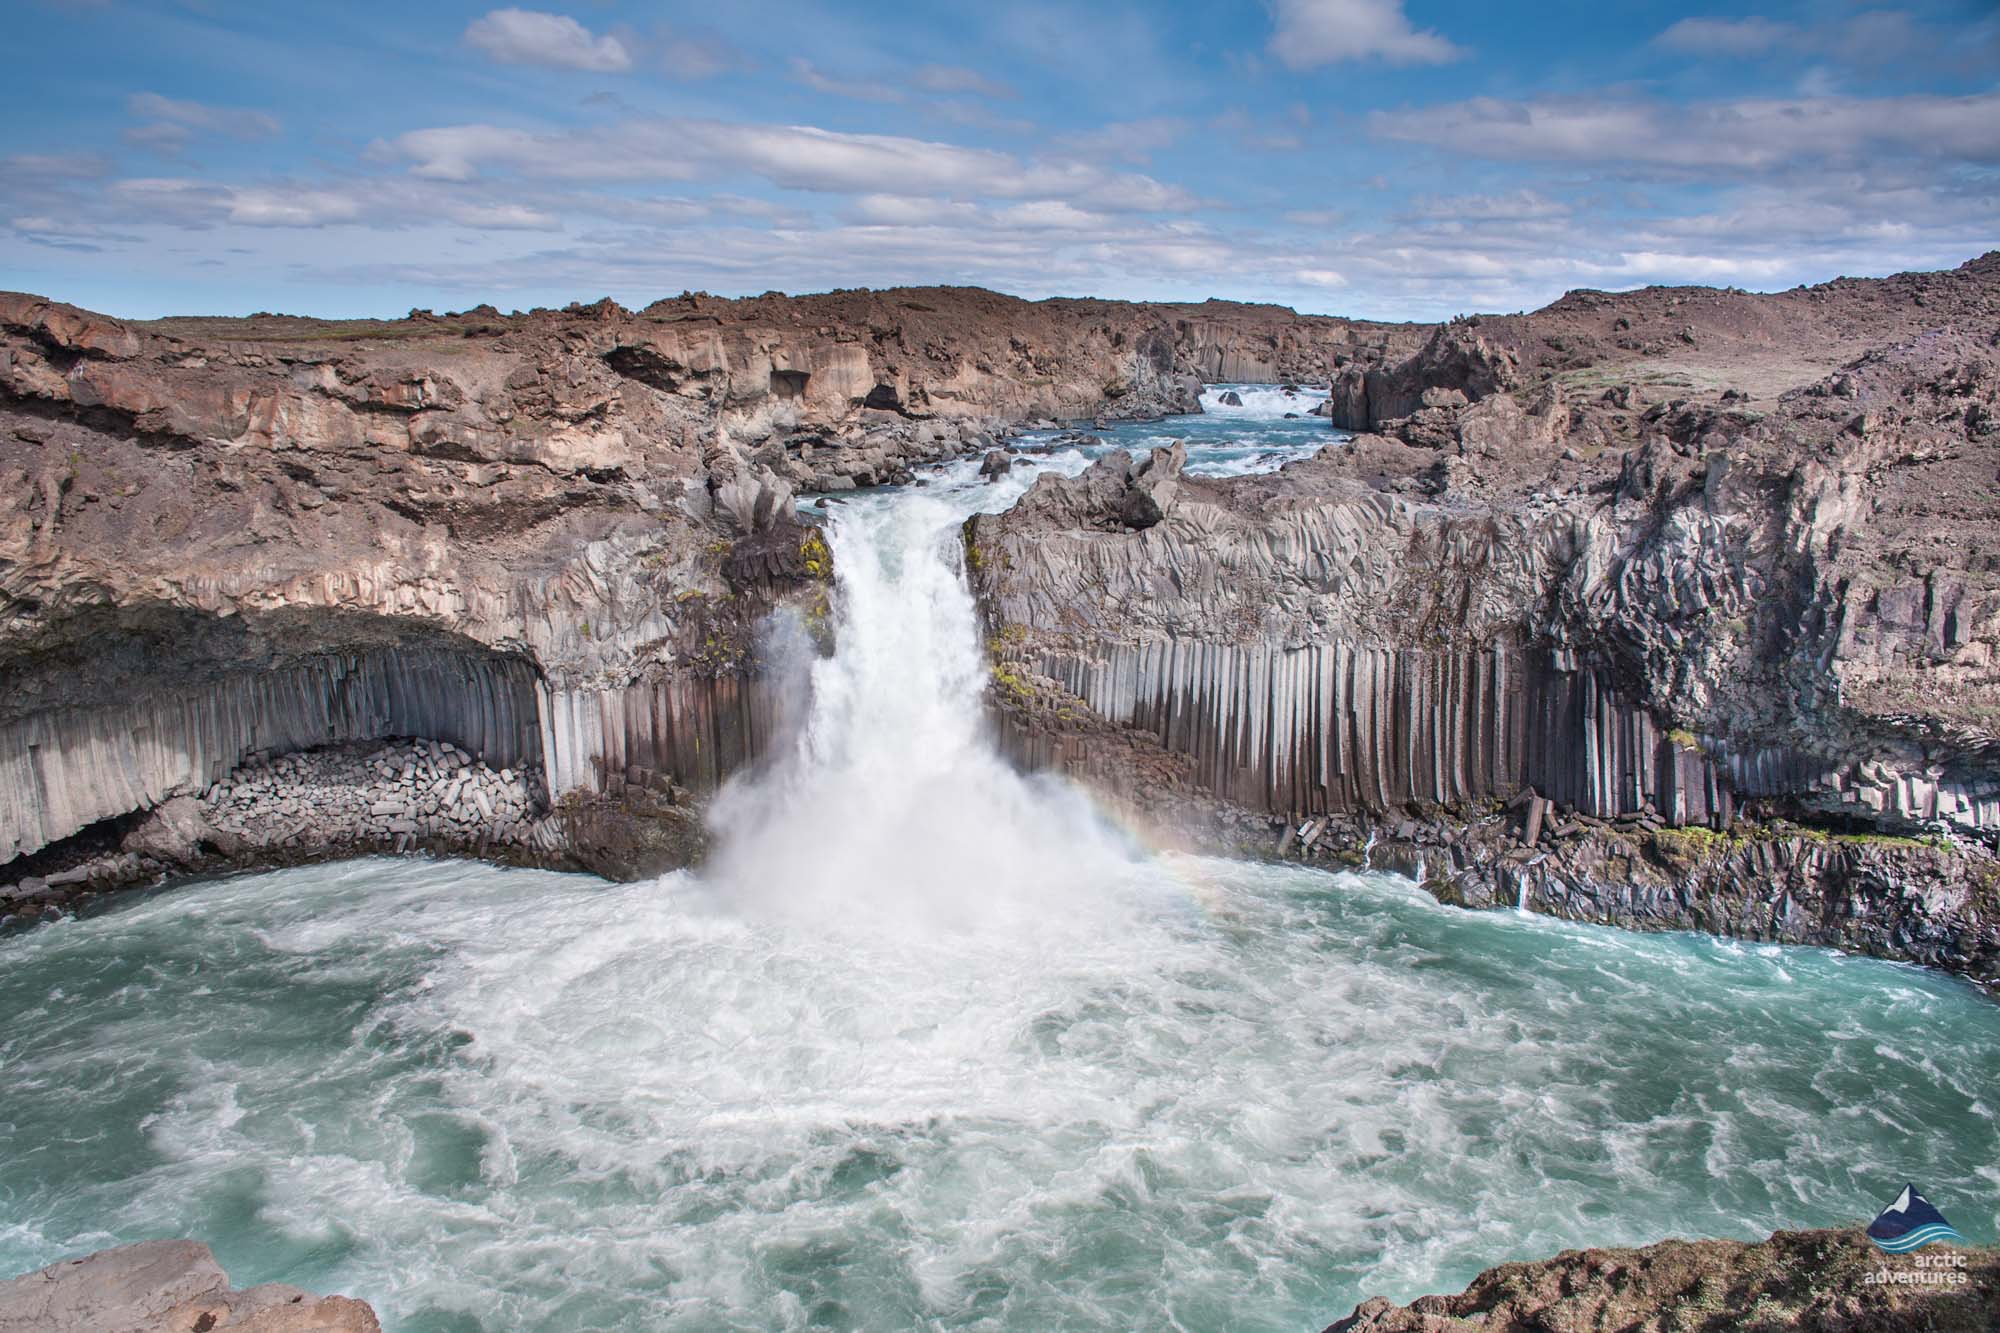 Amazing Facts About Iceland's Waterfalls | Arctic Adventures